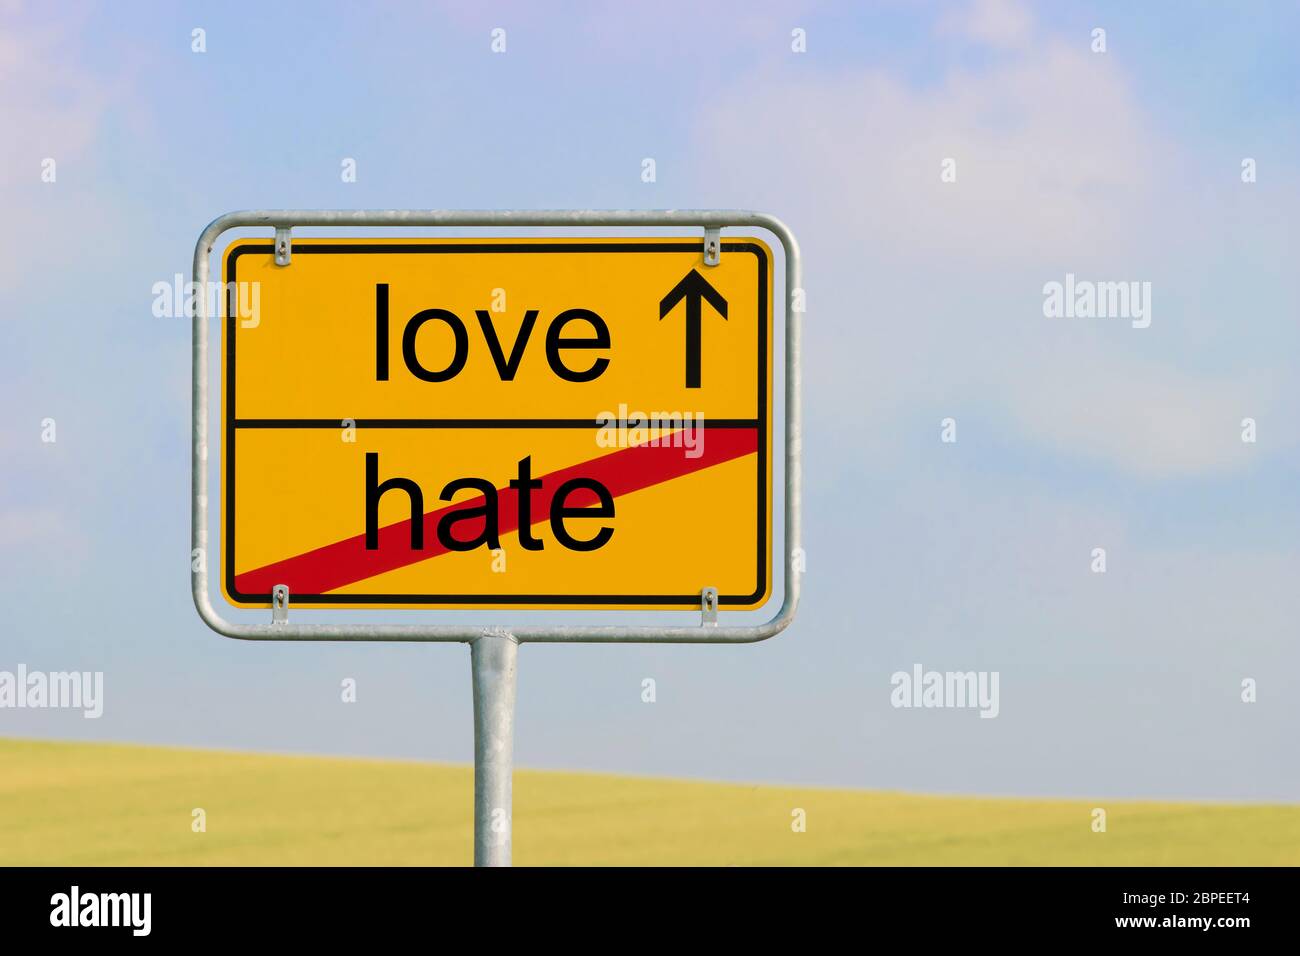 Yellow town sign with text 'hate love' Stock Photo